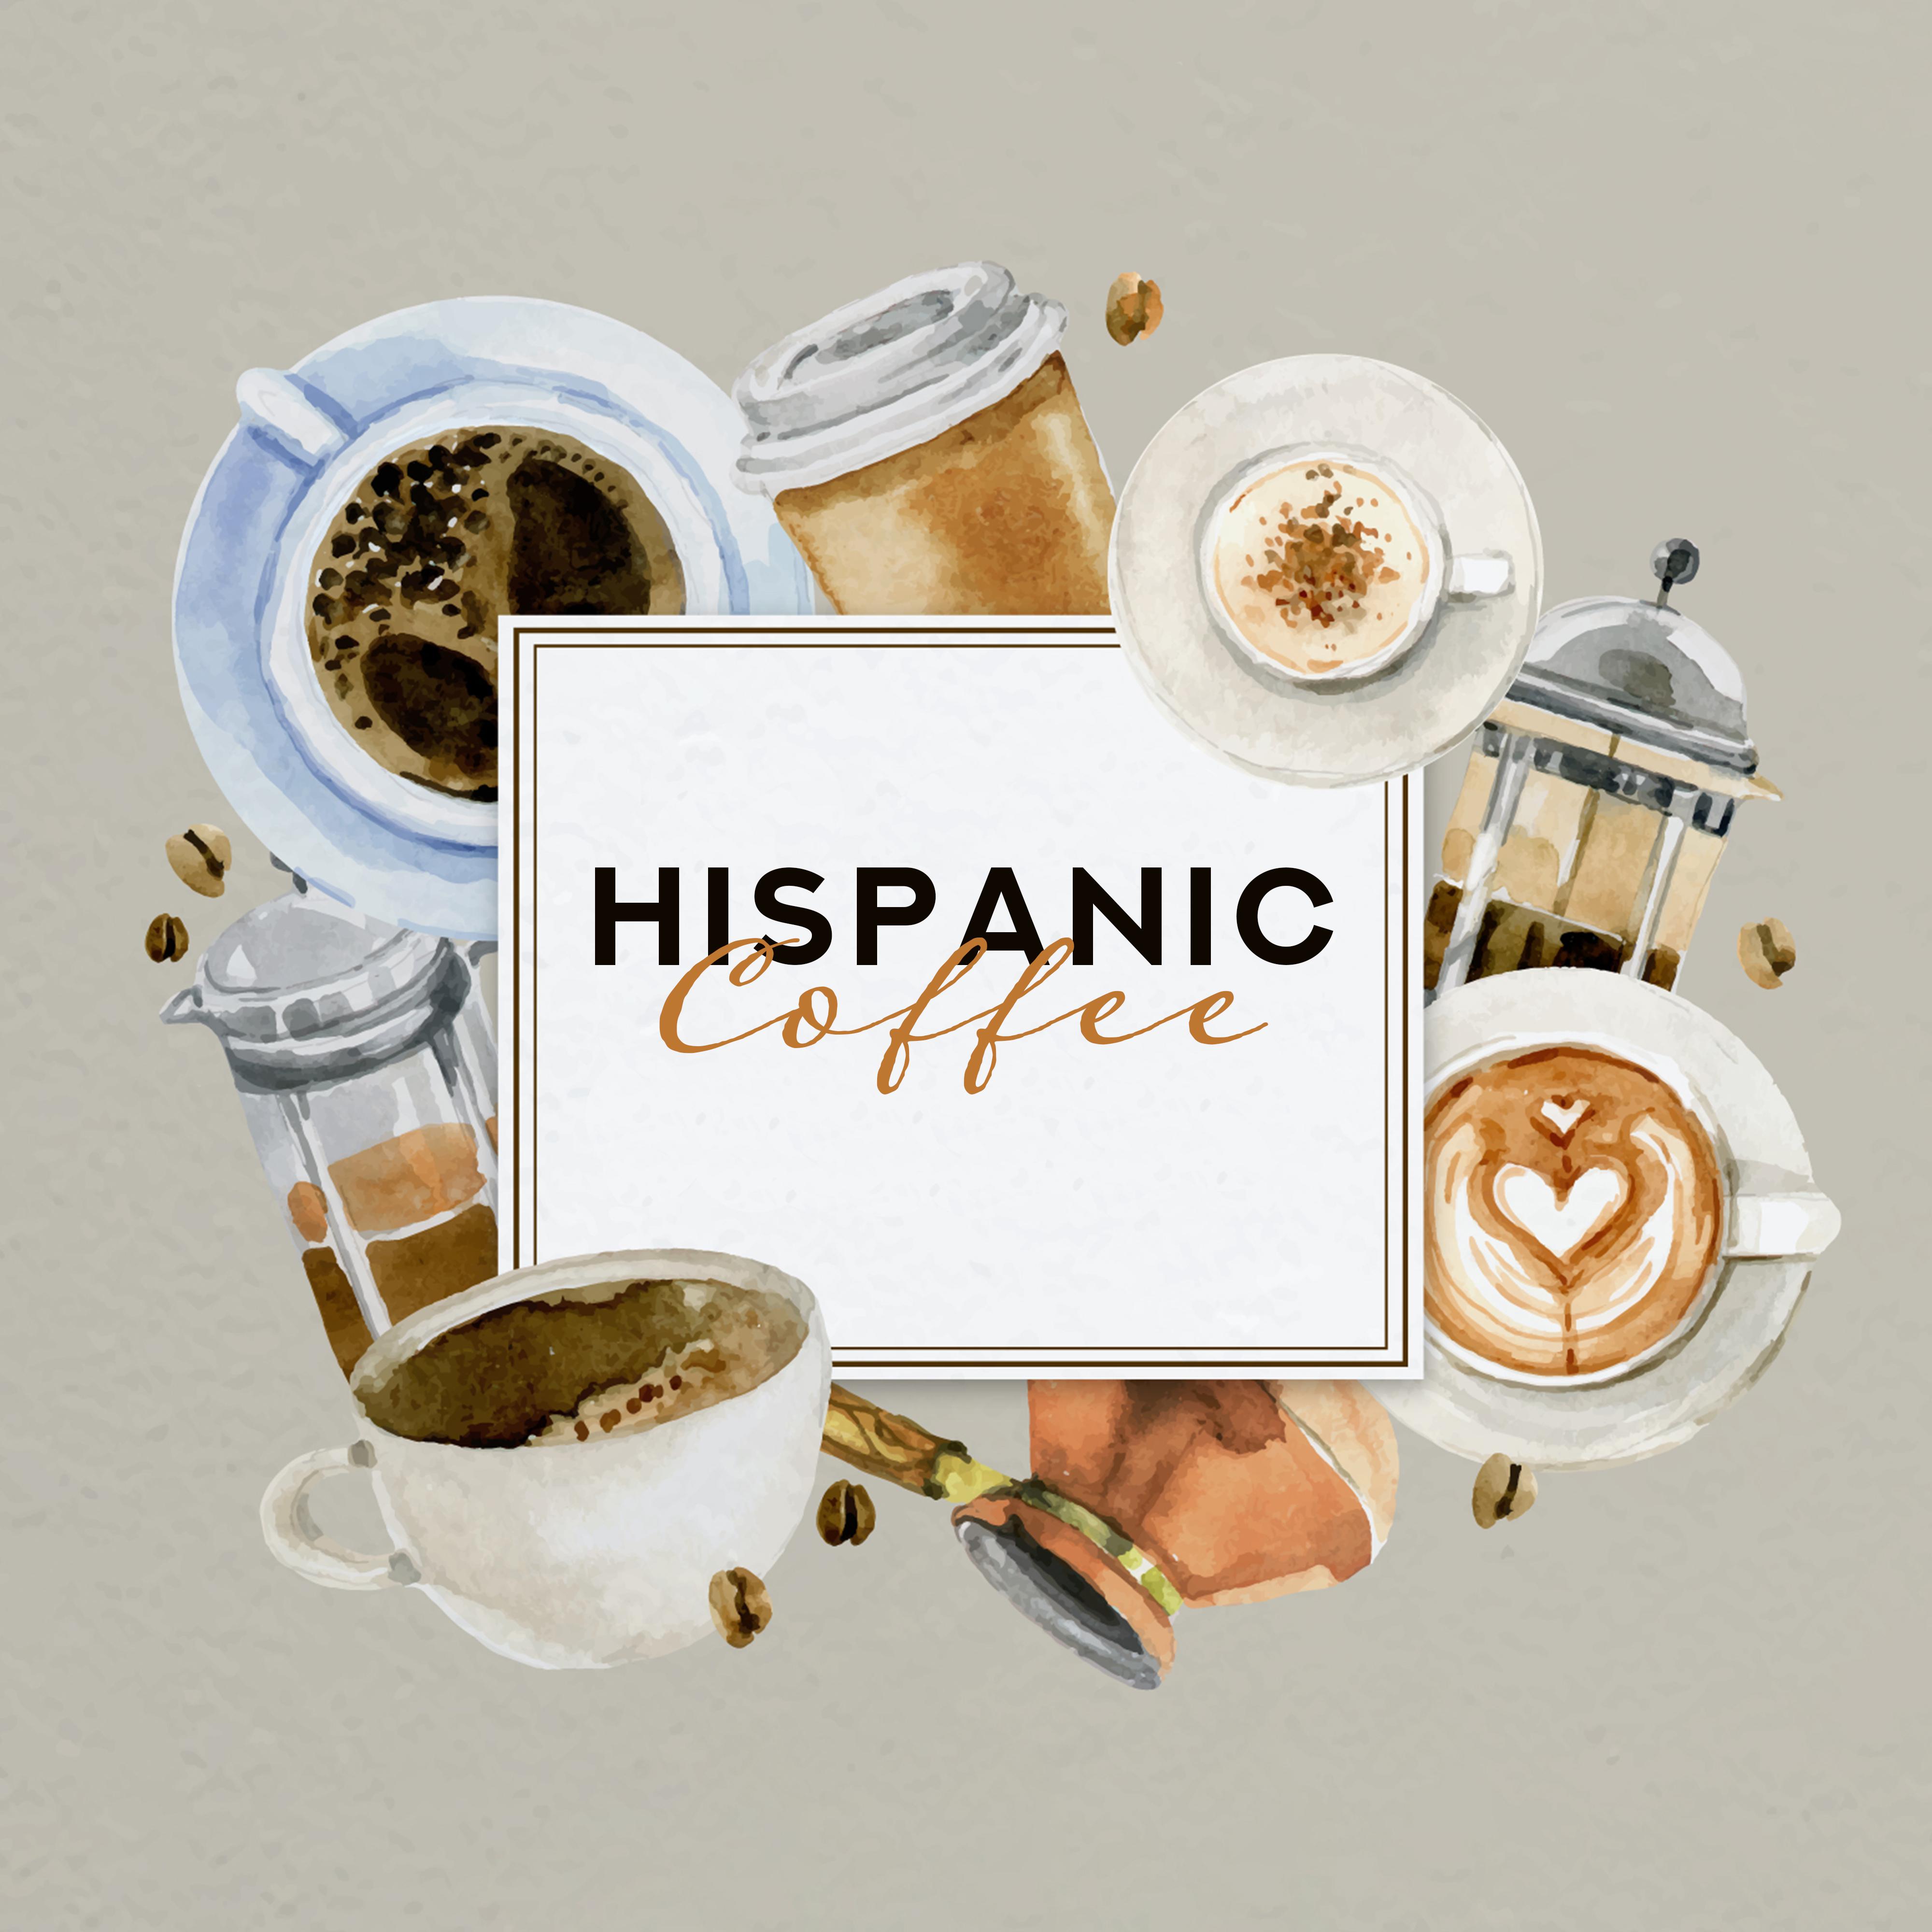 Hispanic Coffee: Morning Dose of Latin Subtle Jazz for a Mid-Morning Coffee